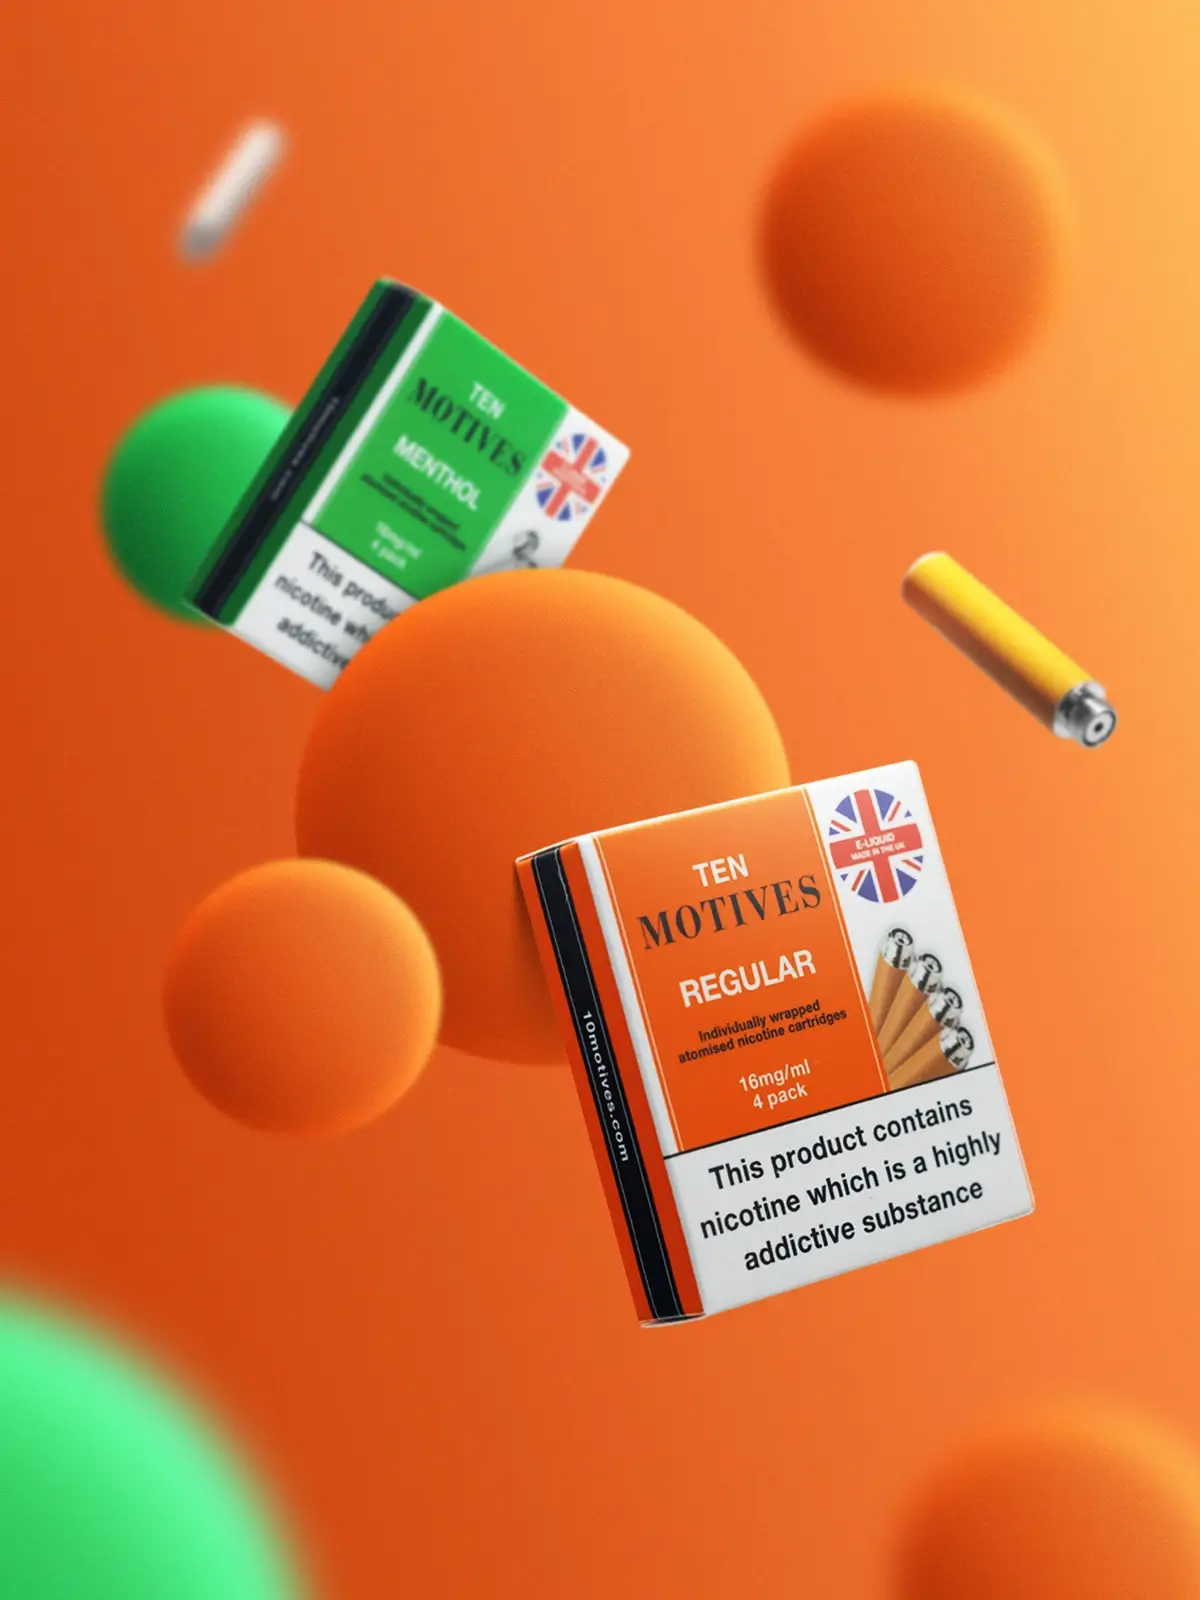 Two packs of Ten Motives refills, Regular and Menthol, floating in front of an orange background along with some loose refills